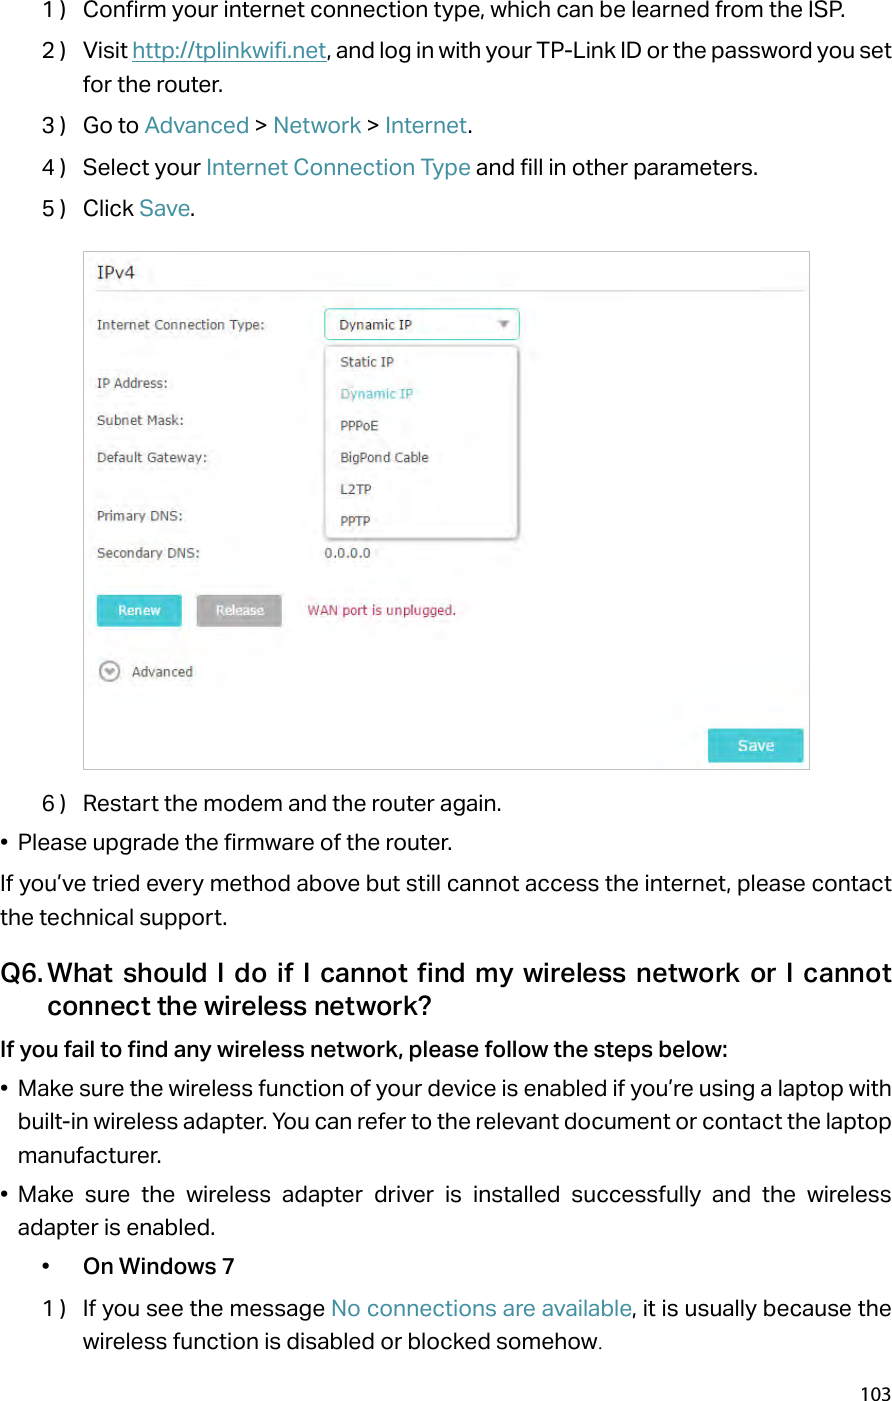 1031 )  Confirm your internet connection type, which can be learned from the ISP.2 )  Visit http://tplinkwifi.net, and log in with your TP-Link ID or the password you set for the router.3 )  Go to Advanced &gt; Network &gt; Internet.4 )  Select your Internet Connection Type and fill in other parameters.5 )  Click Save.6 )  Restart the modem and the router again.•  Please upgrade the firmware of the router.If you’ve tried every method above but still cannot access the internet, please contact the technical support.Q6. What should I do if I cannot find my wireless network or I cannot connect the wireless network?If you fail to find any wireless network, please follow the steps below:•  Make sure the wireless function of your device is enabled if you’re using a laptop with built-in wireless adapter. You can refer to the relevant document or contact the laptop manufacturer.•  Make sure the wireless adapter driver is installed successfully and the wireless adapter is enabled.•  On Windows 71 )  If you see the message No connections are available, it is usually because the wireless function is disabled or blocked somehow.